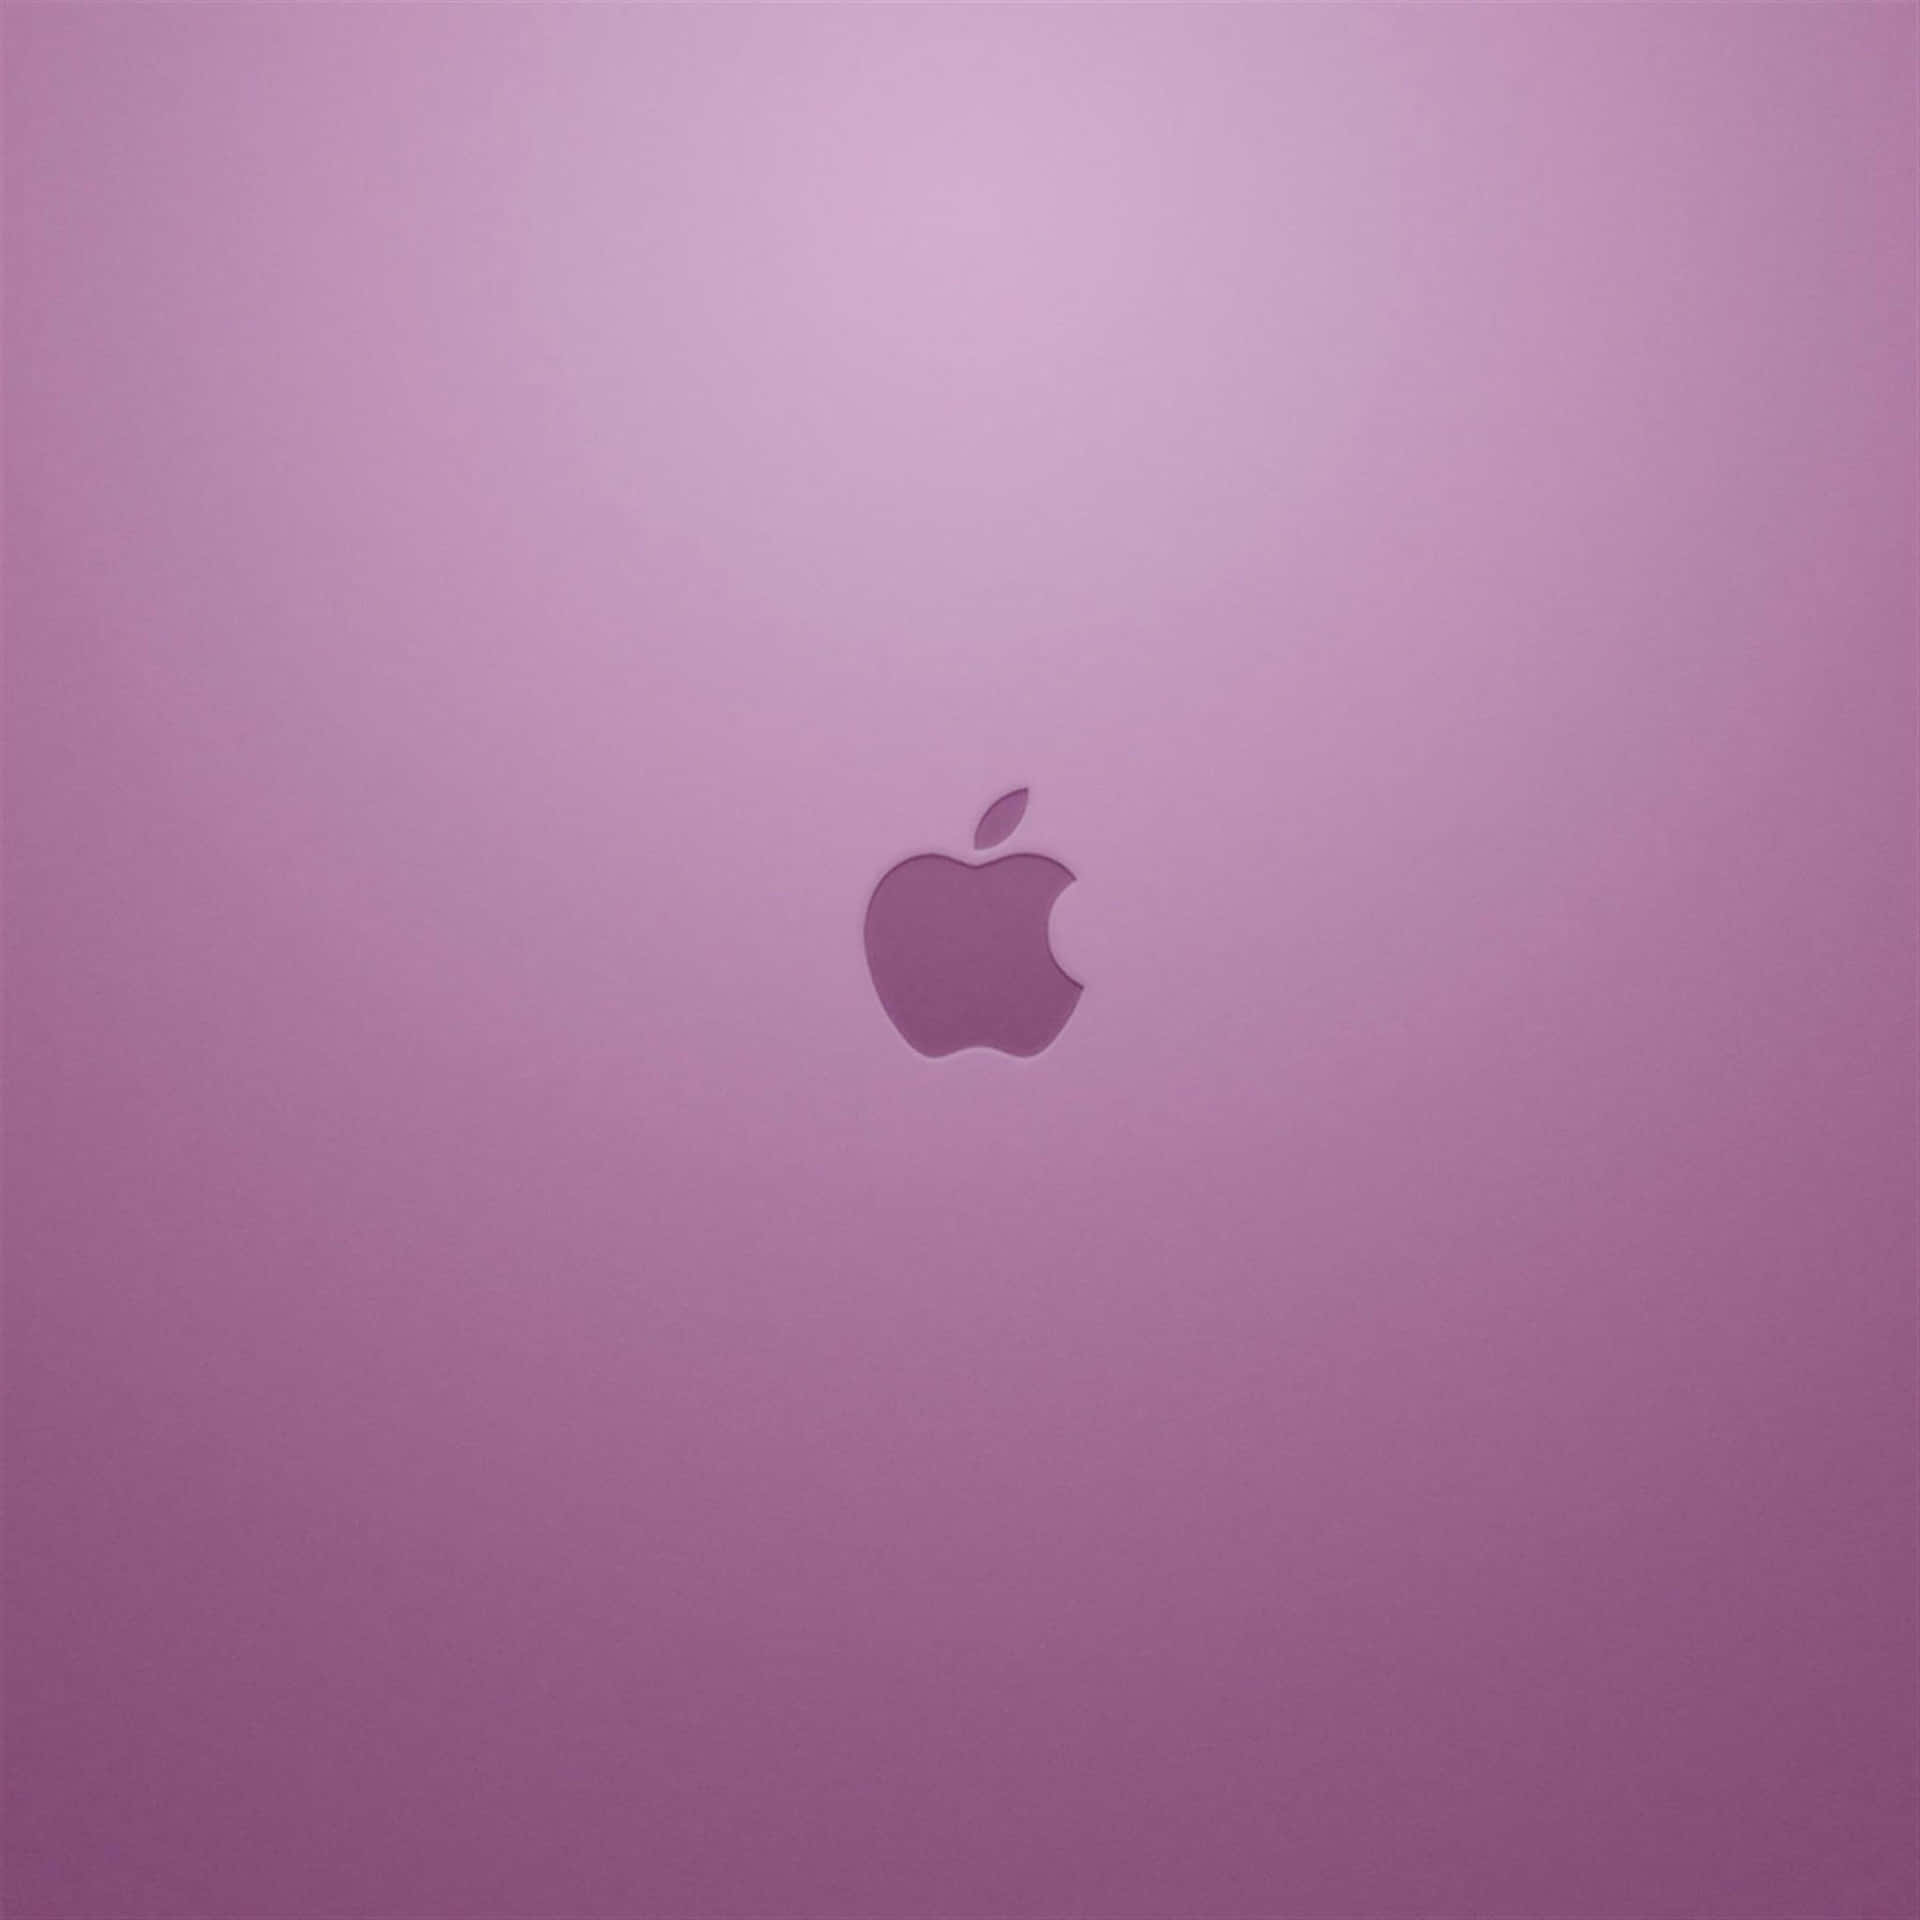 Pink Ipad Apple Logo Background Picture